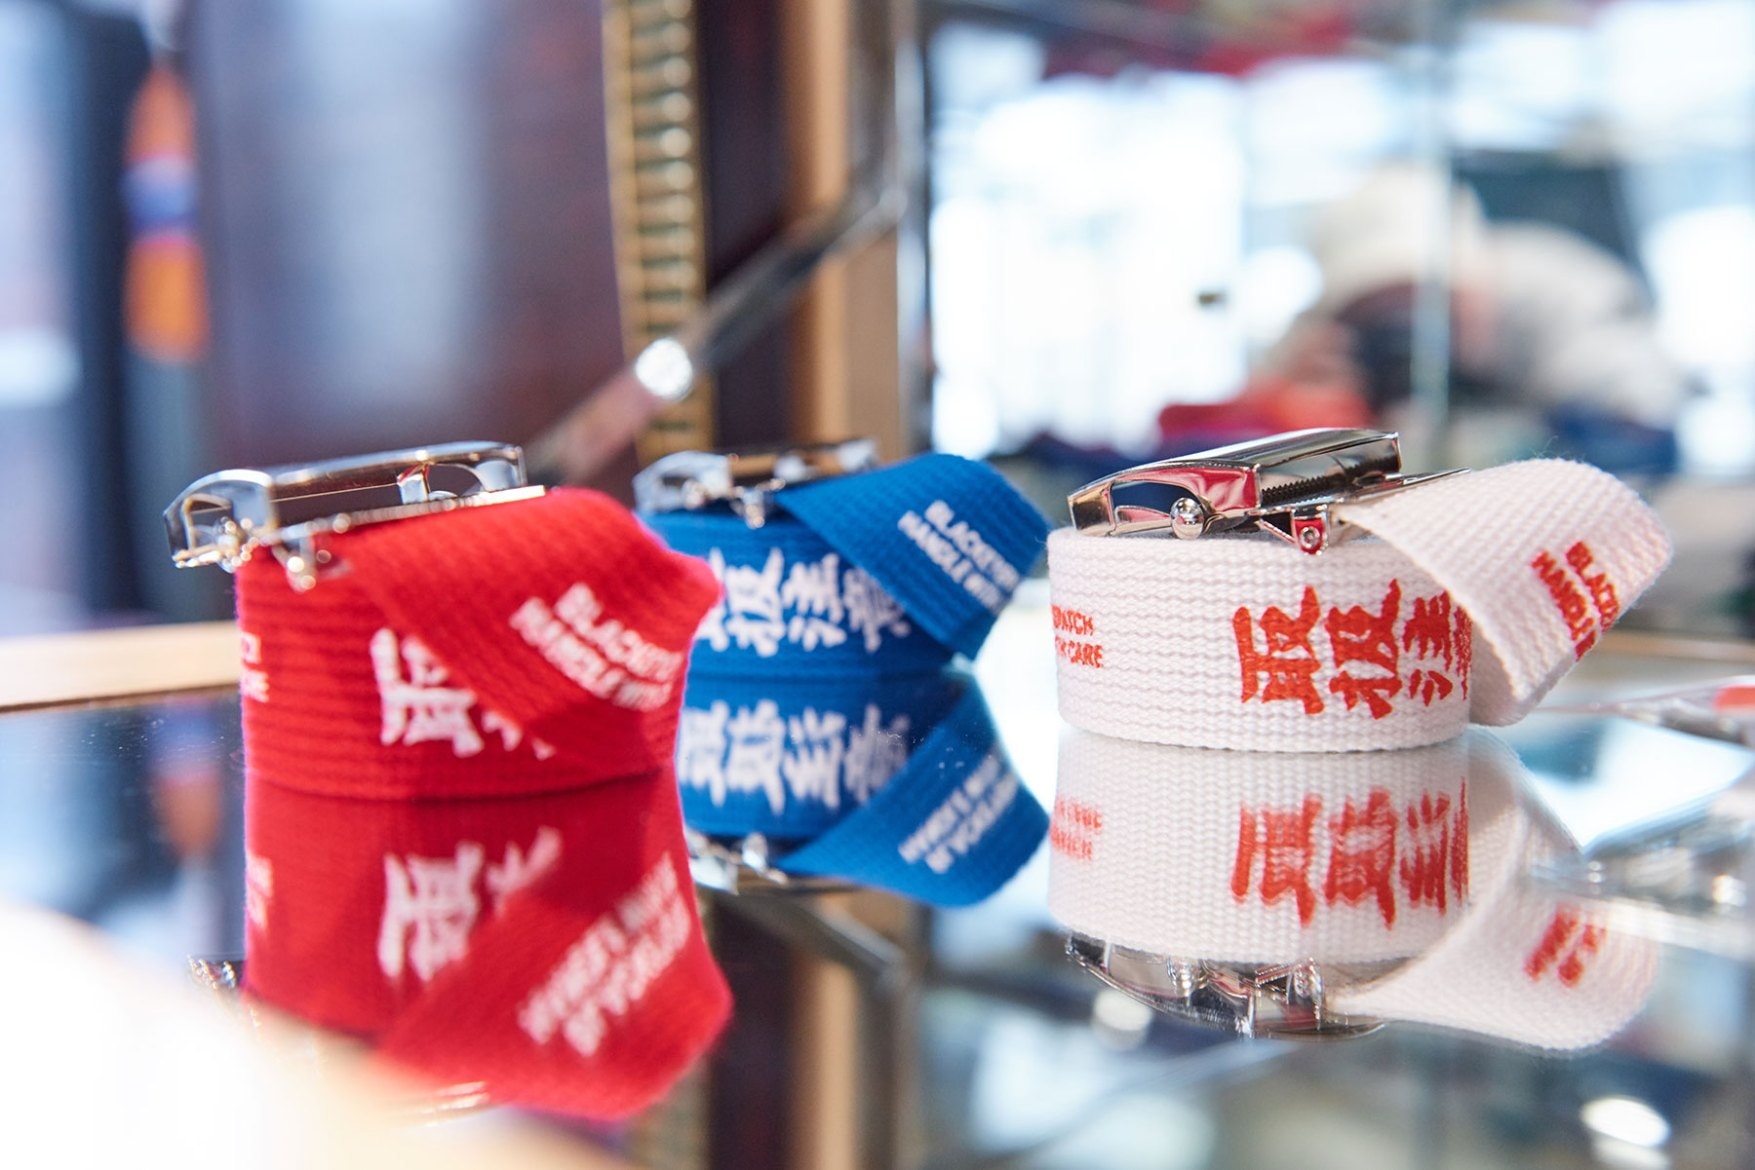 worksout hongdae seoul select shop streetwear collaborations belts red white blue mirror